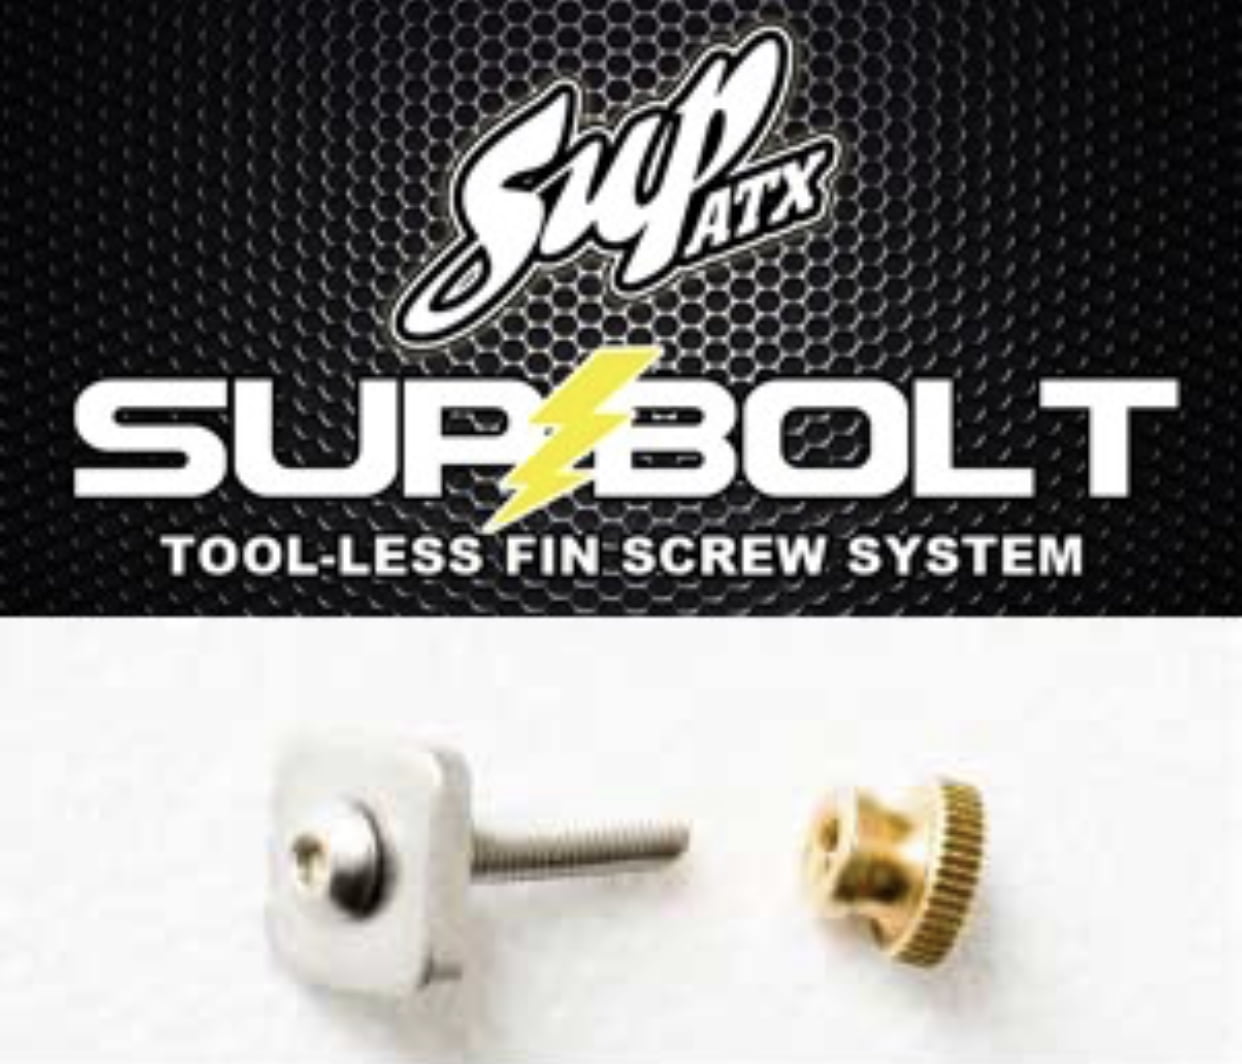 Sent 1st CLASS Fin Nut and Bolt M4 US Box Quick Fit One Size SUP Paddle Board 